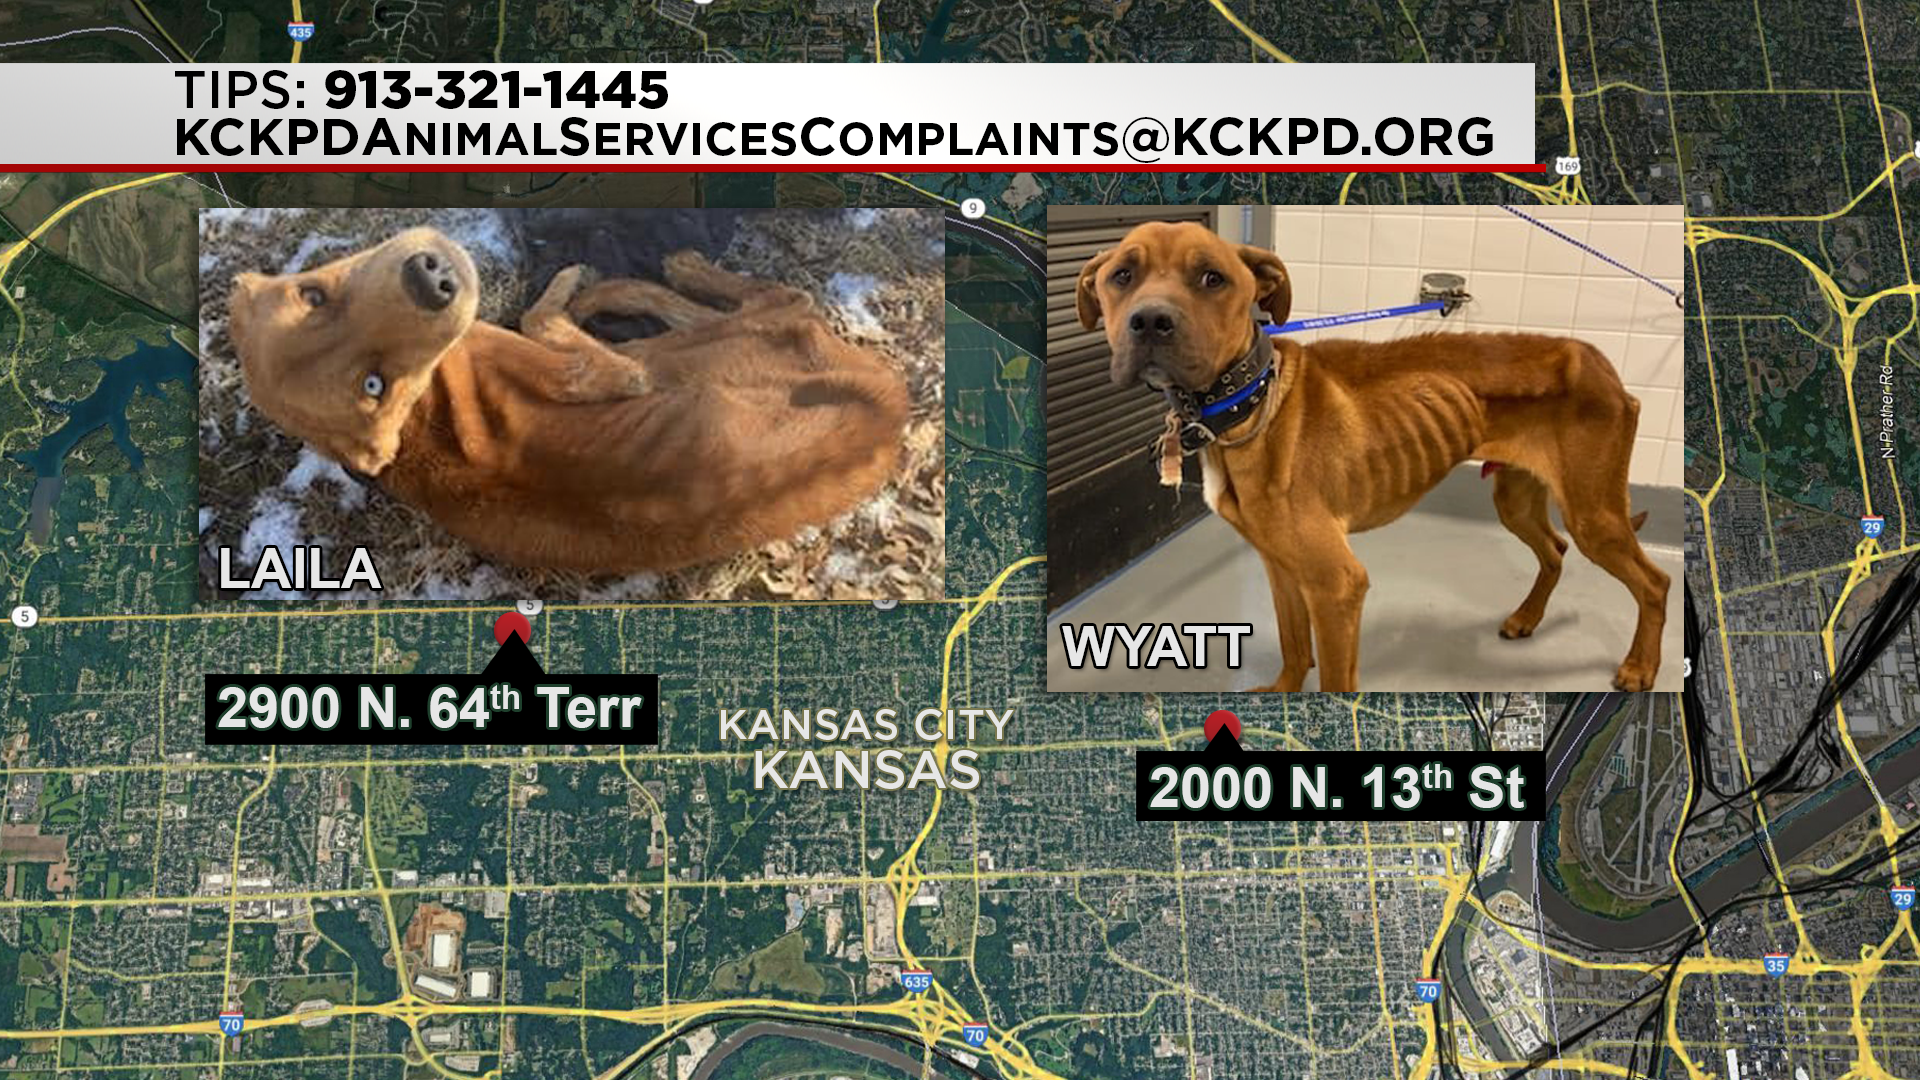 KCK police search for suspects in animal cruelty cases